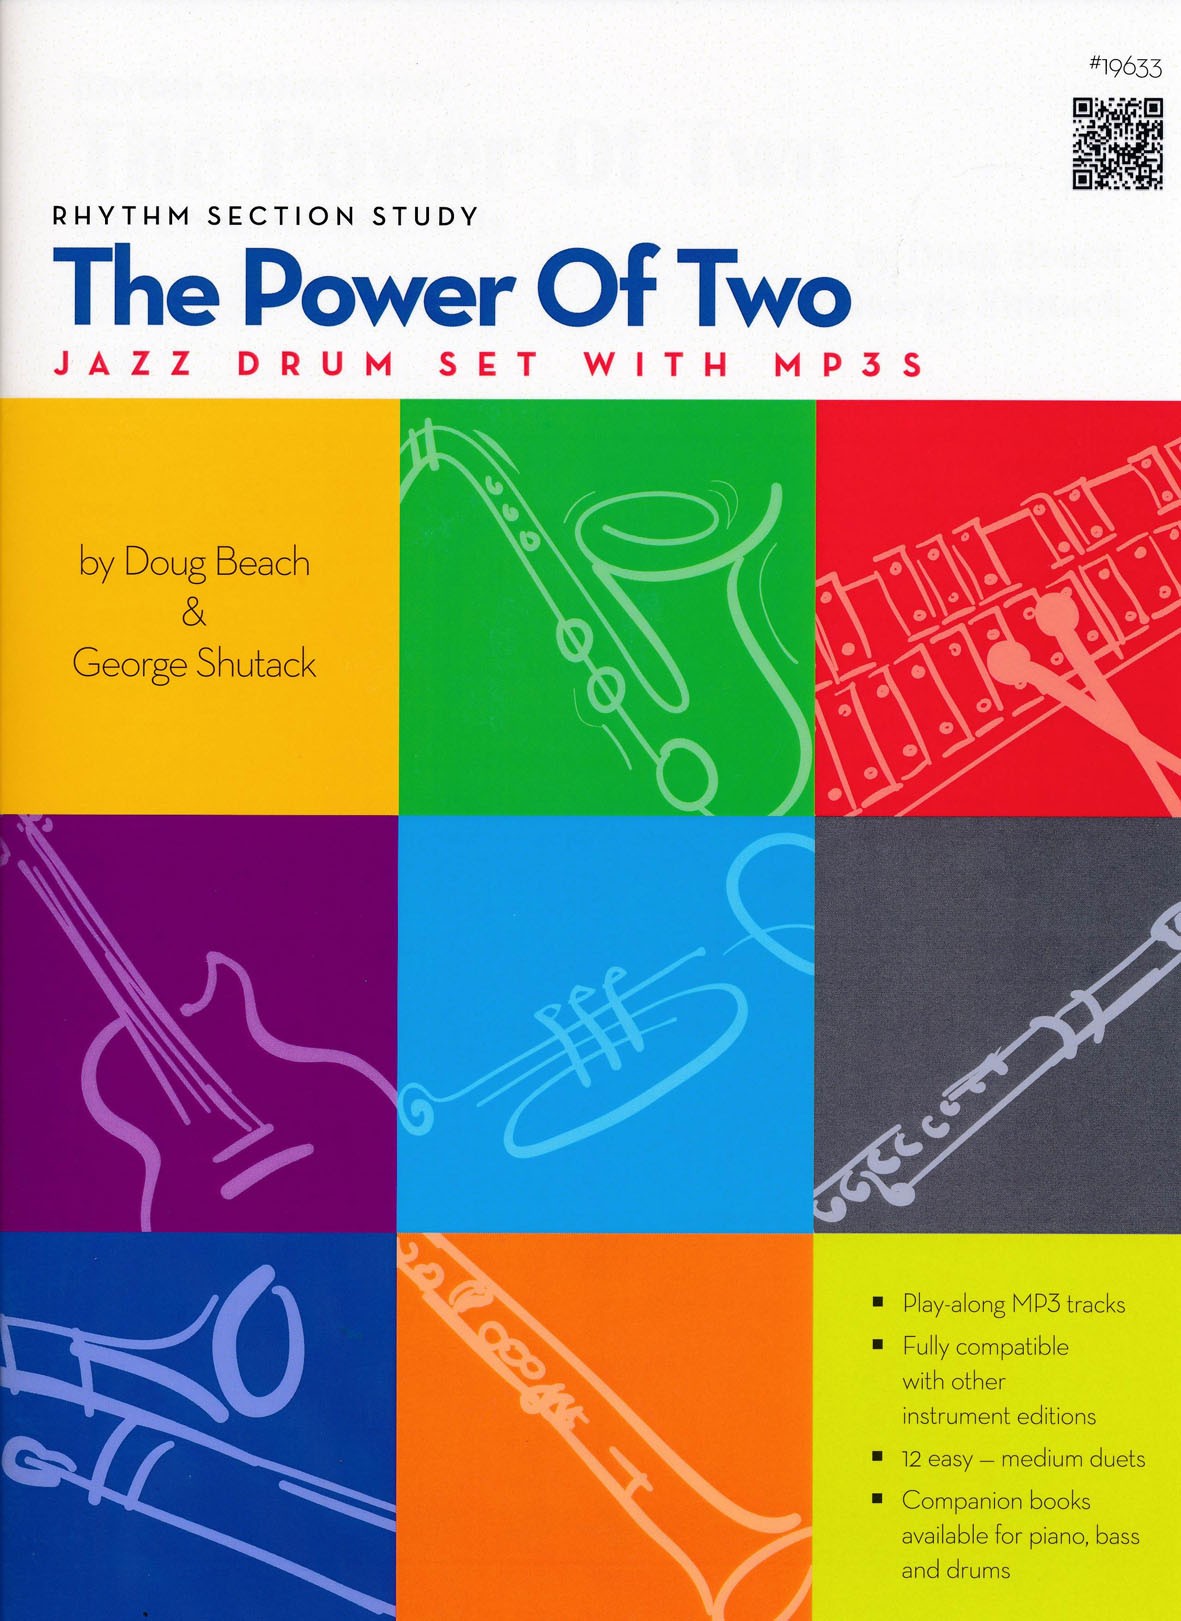 The Power of Two by Doug Beach & George Shutack